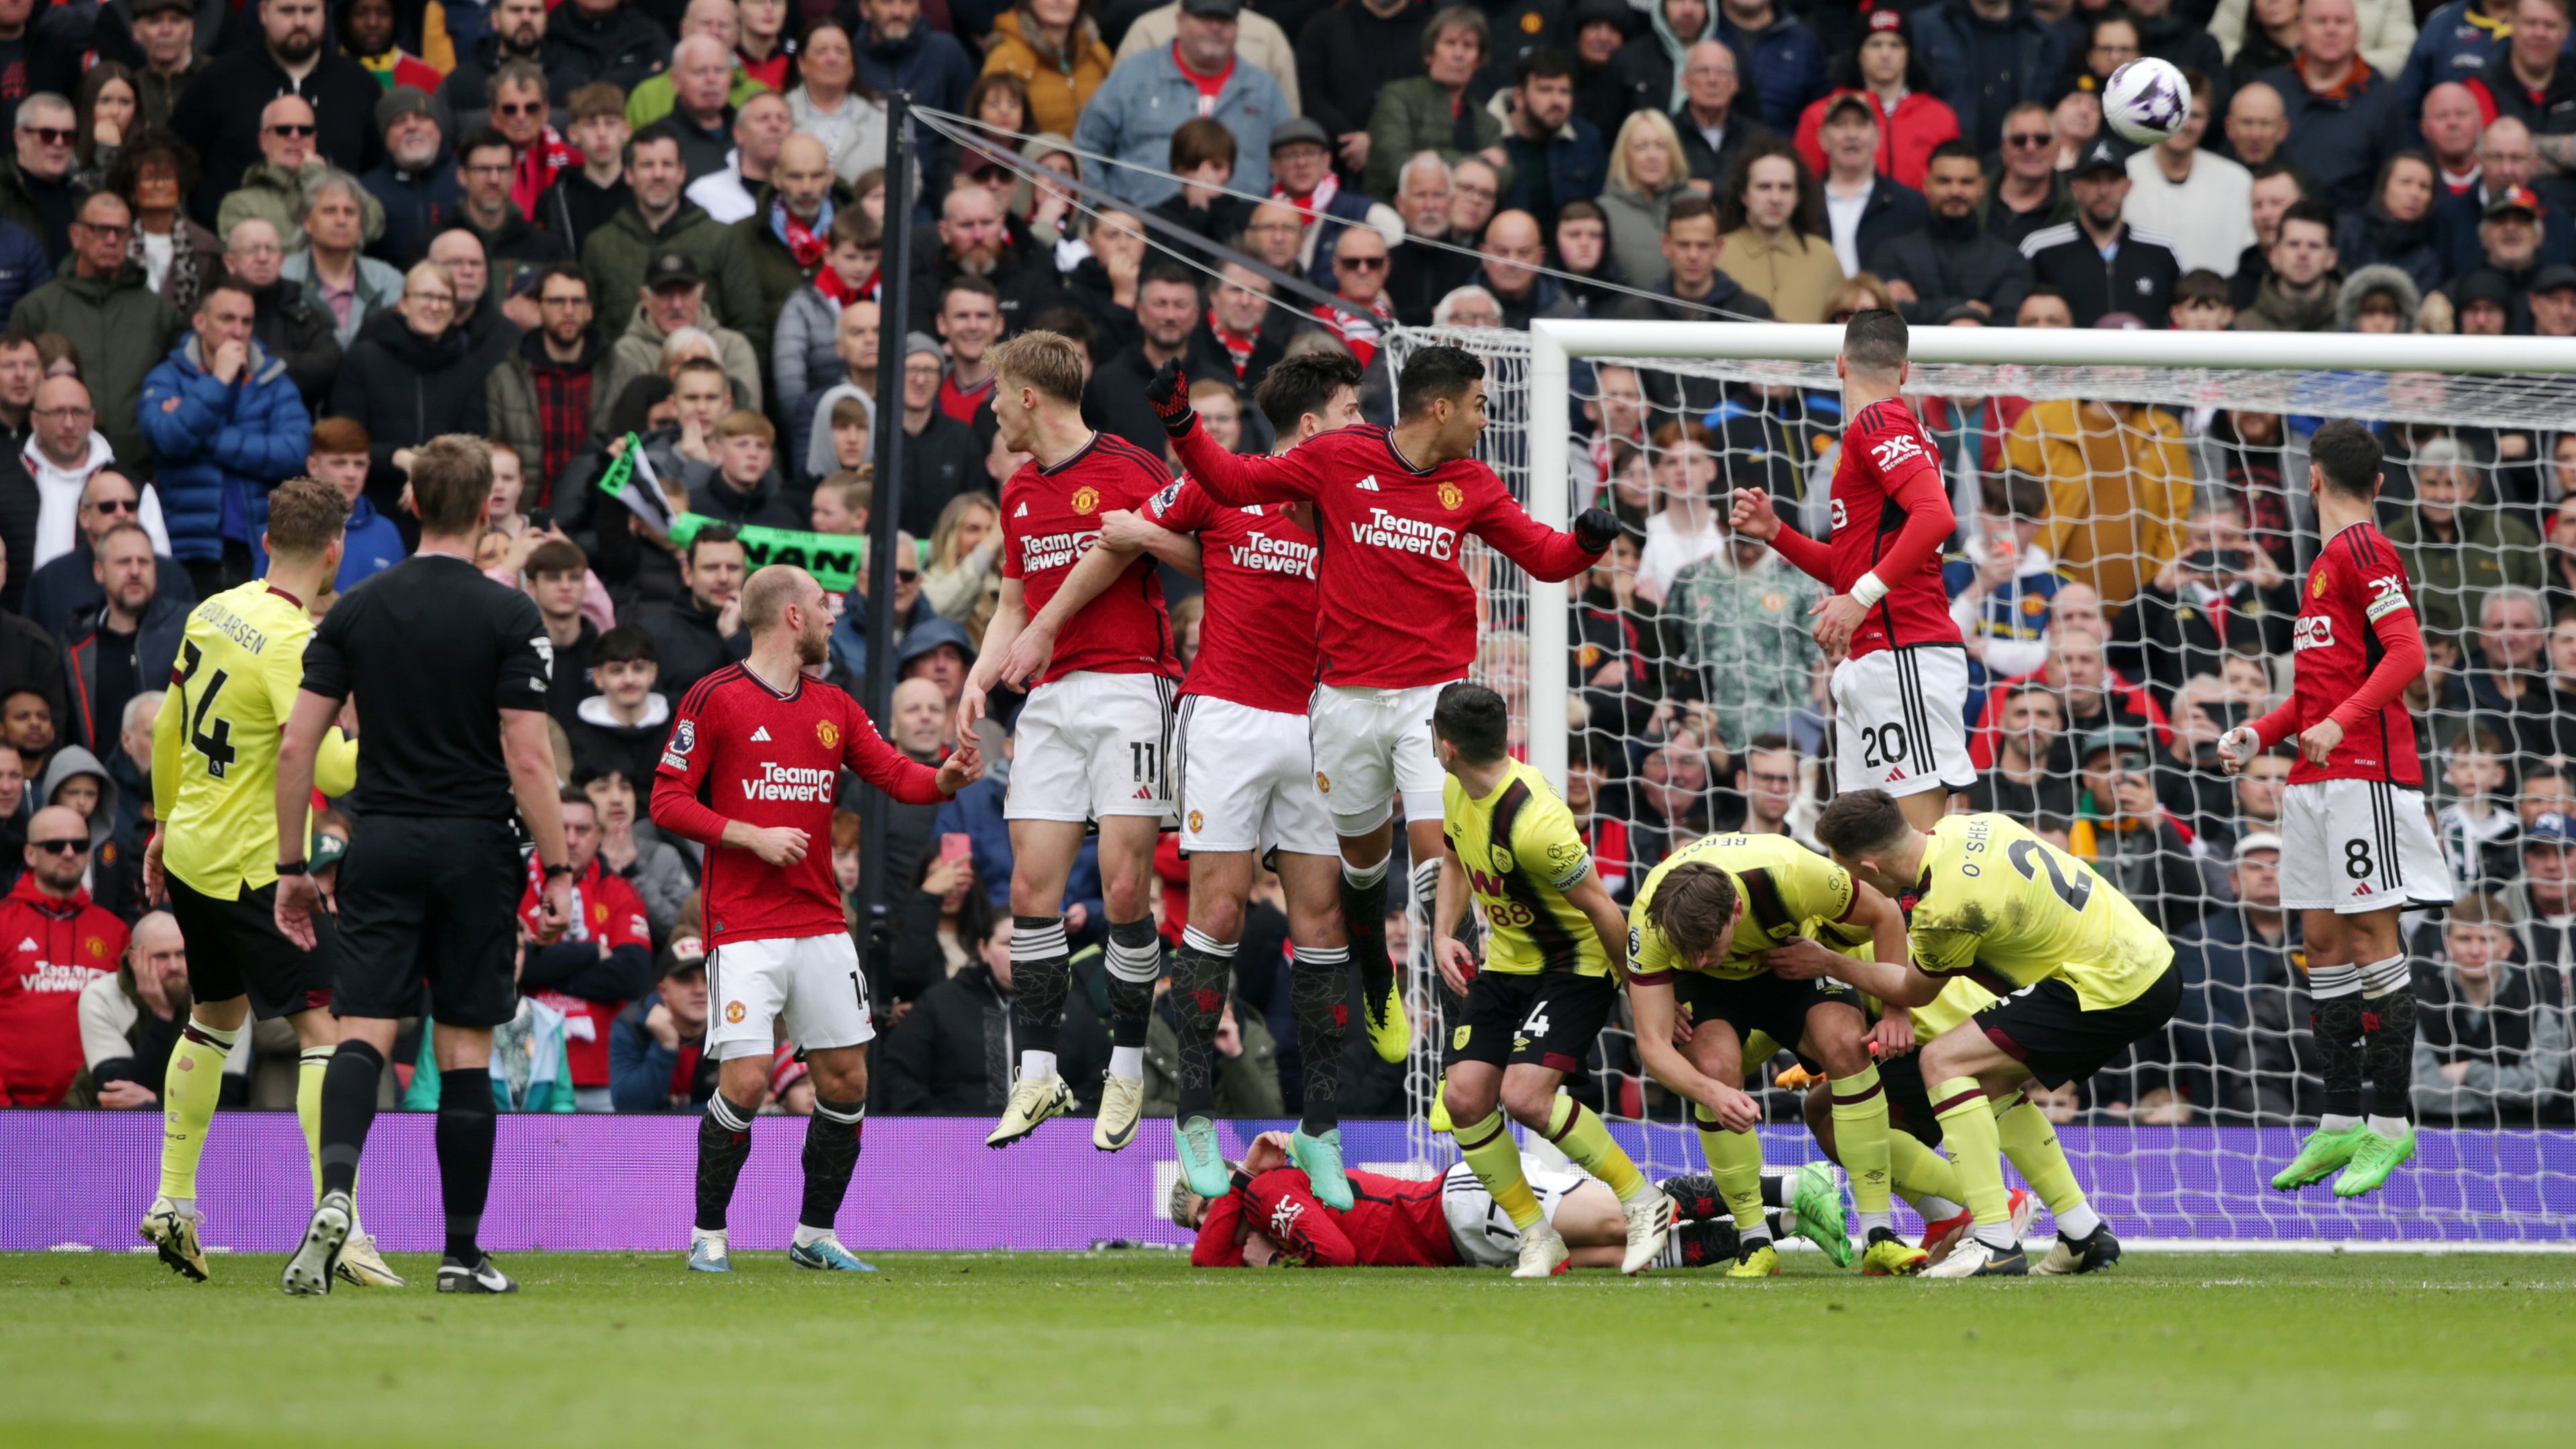 Burnley&#x27;s Jacob Bruun Larsen takes a free kick during the Premier League match at Old Trafford.